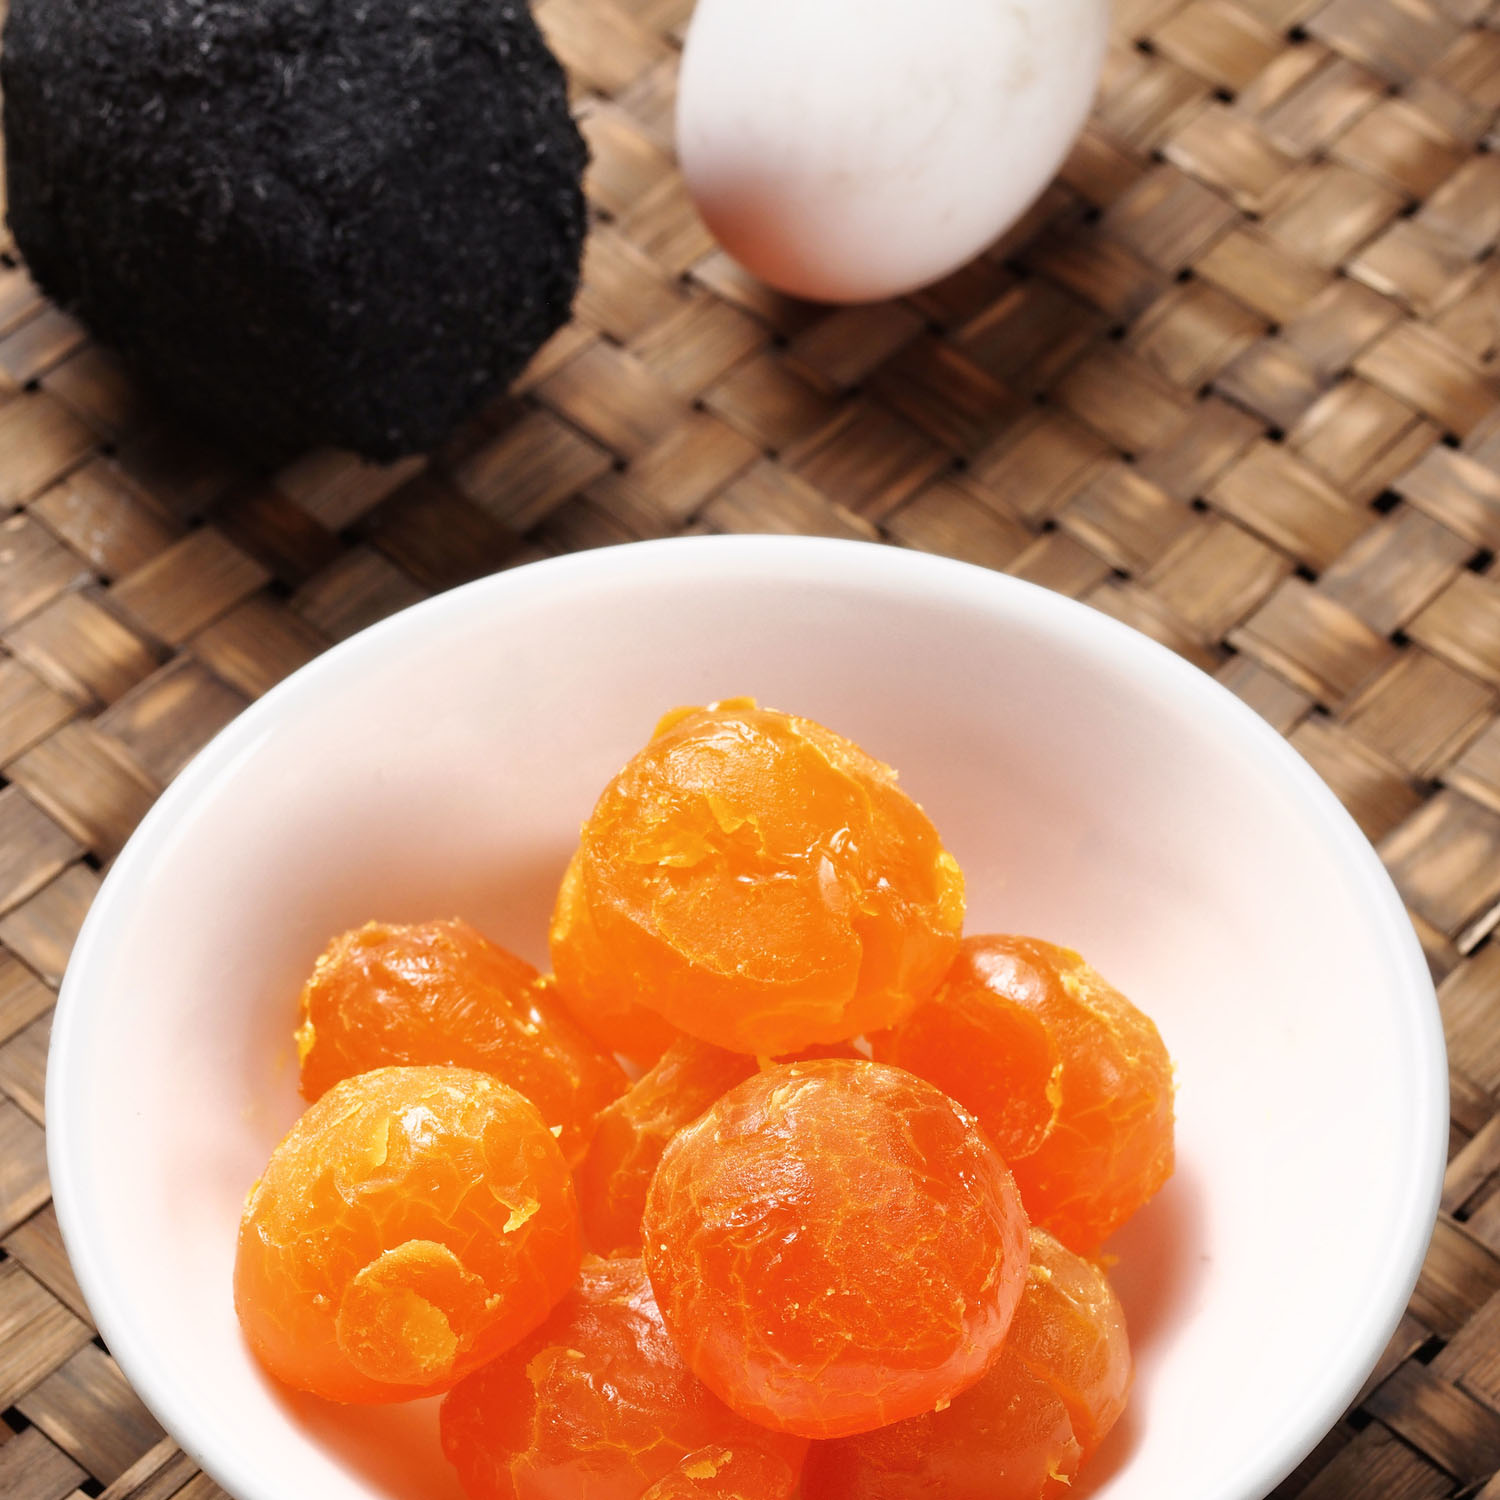 Salt cured egg yolks are a traditional dish in Asian cuisine. 